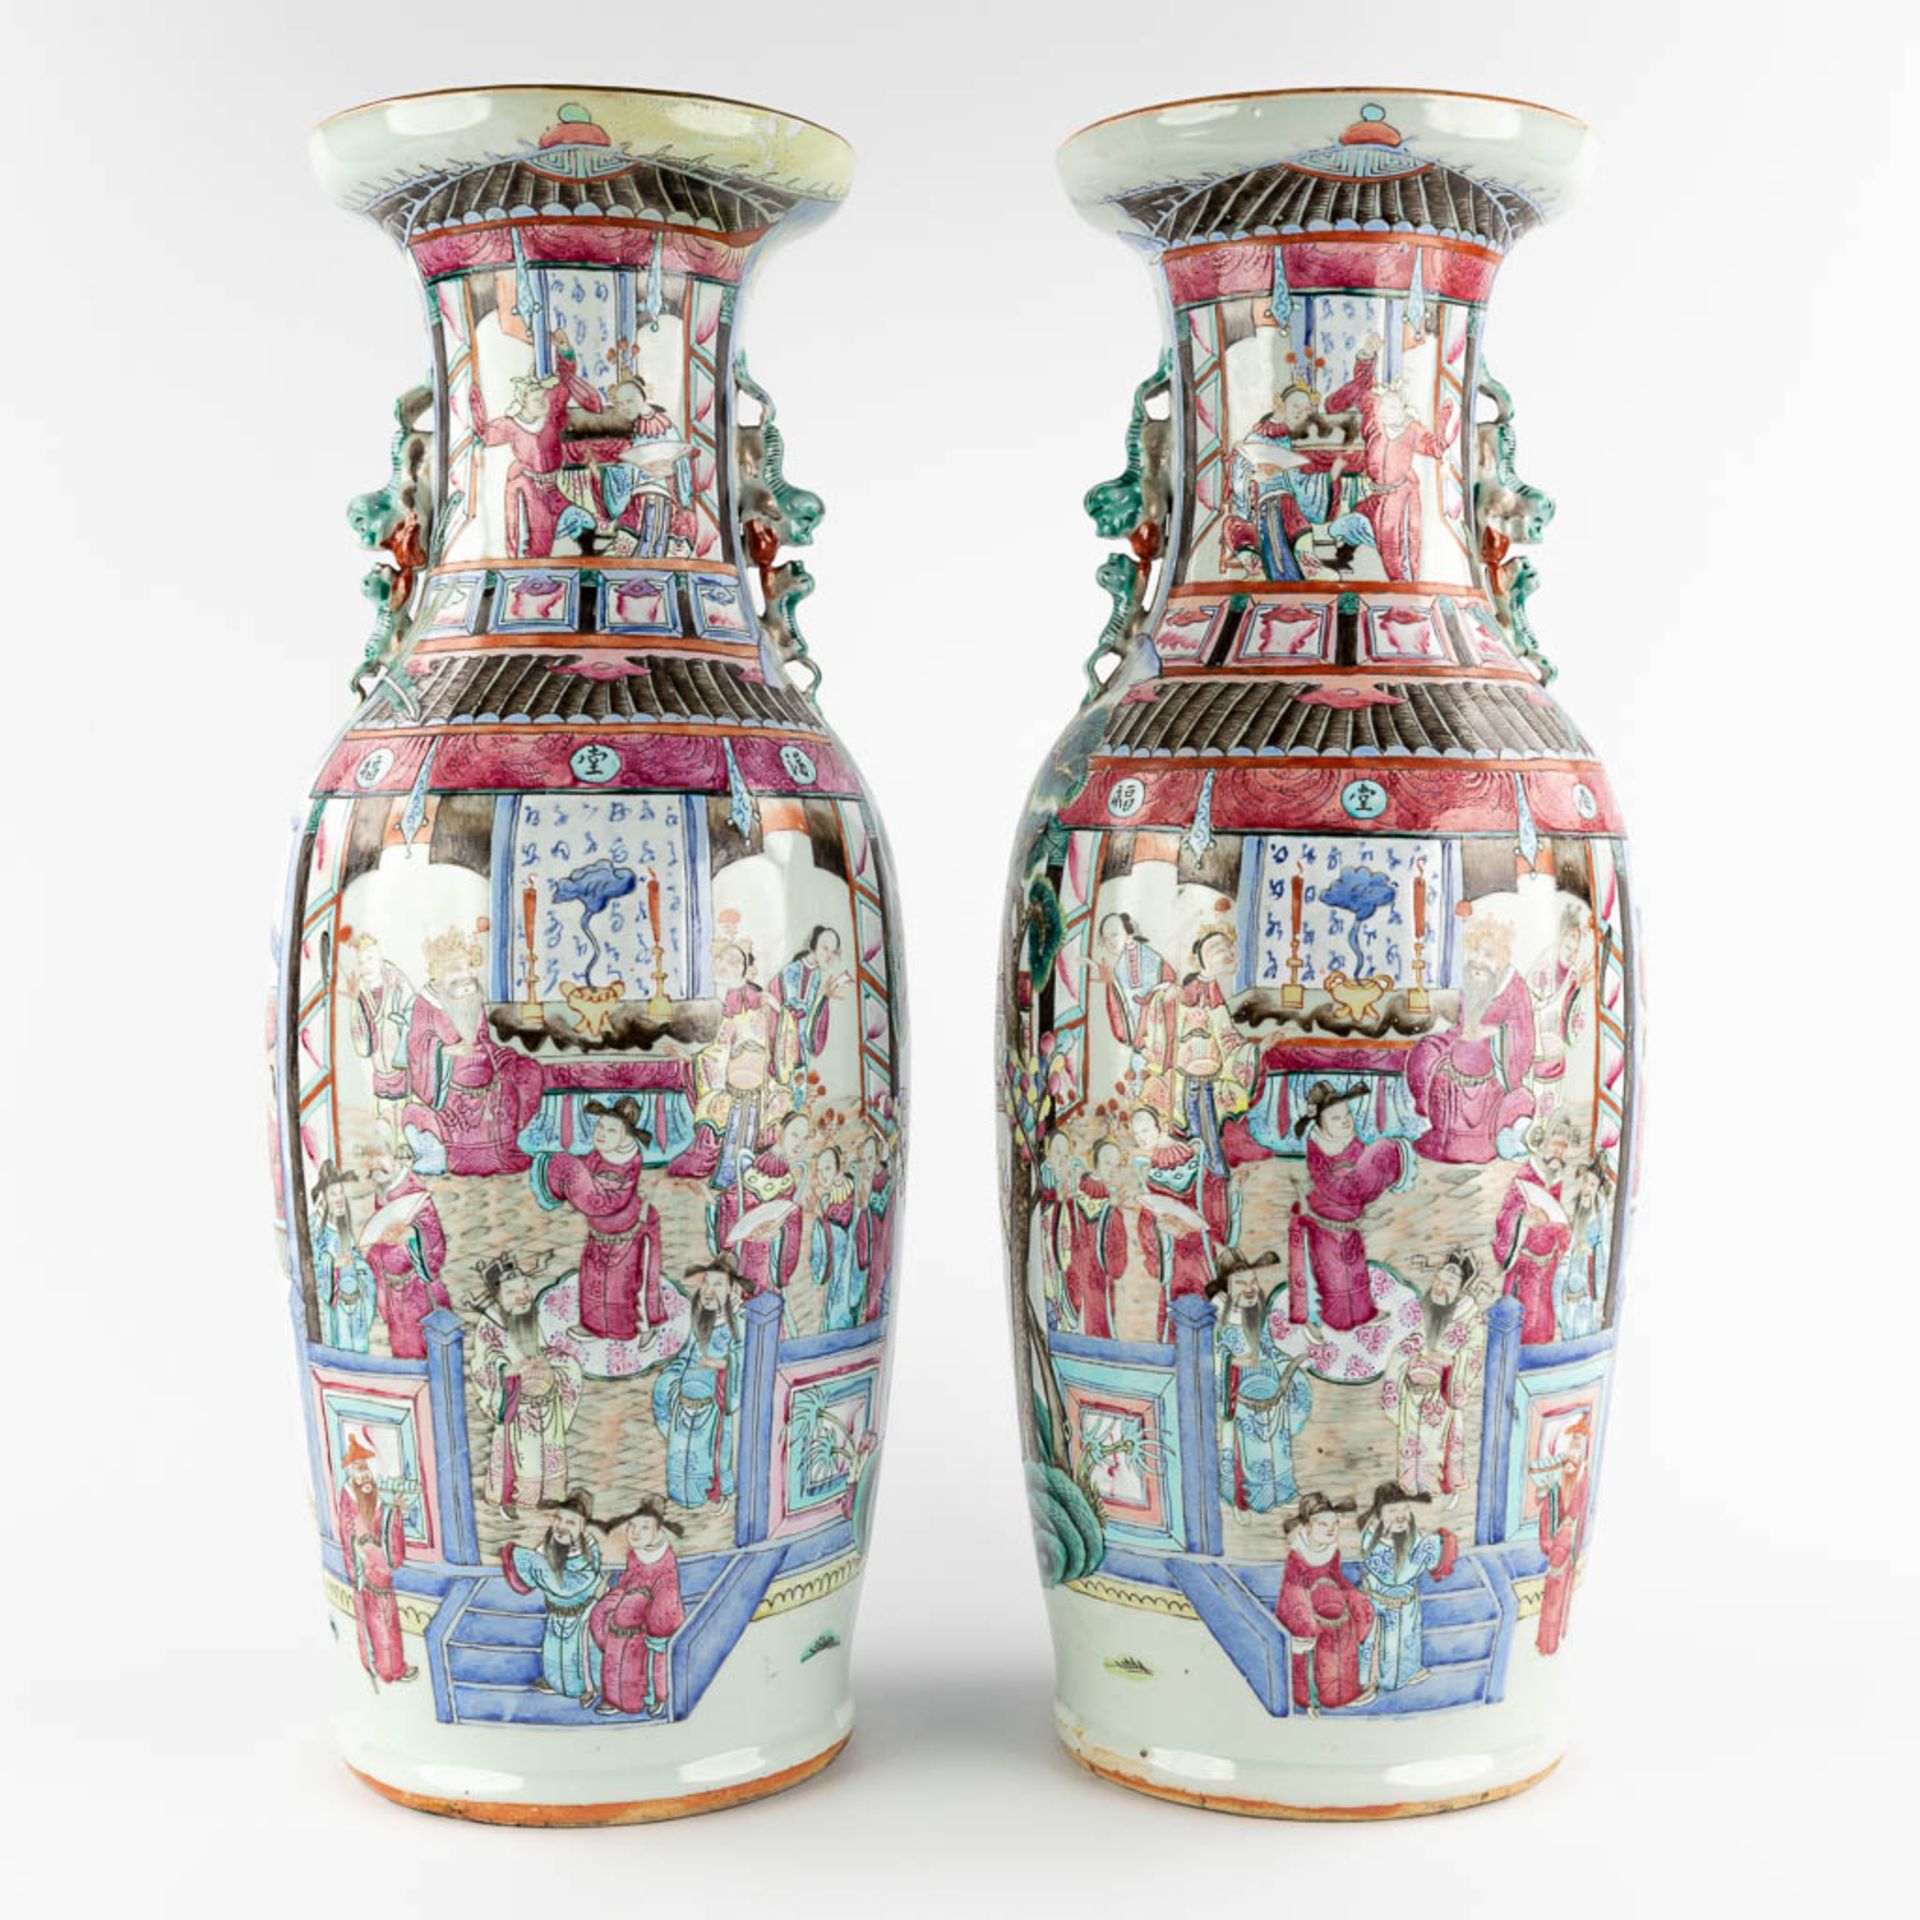 A pair of Chinese vases with Famille Rose vases with a temple scène, 19th C. (H:61 x D:23 cm)